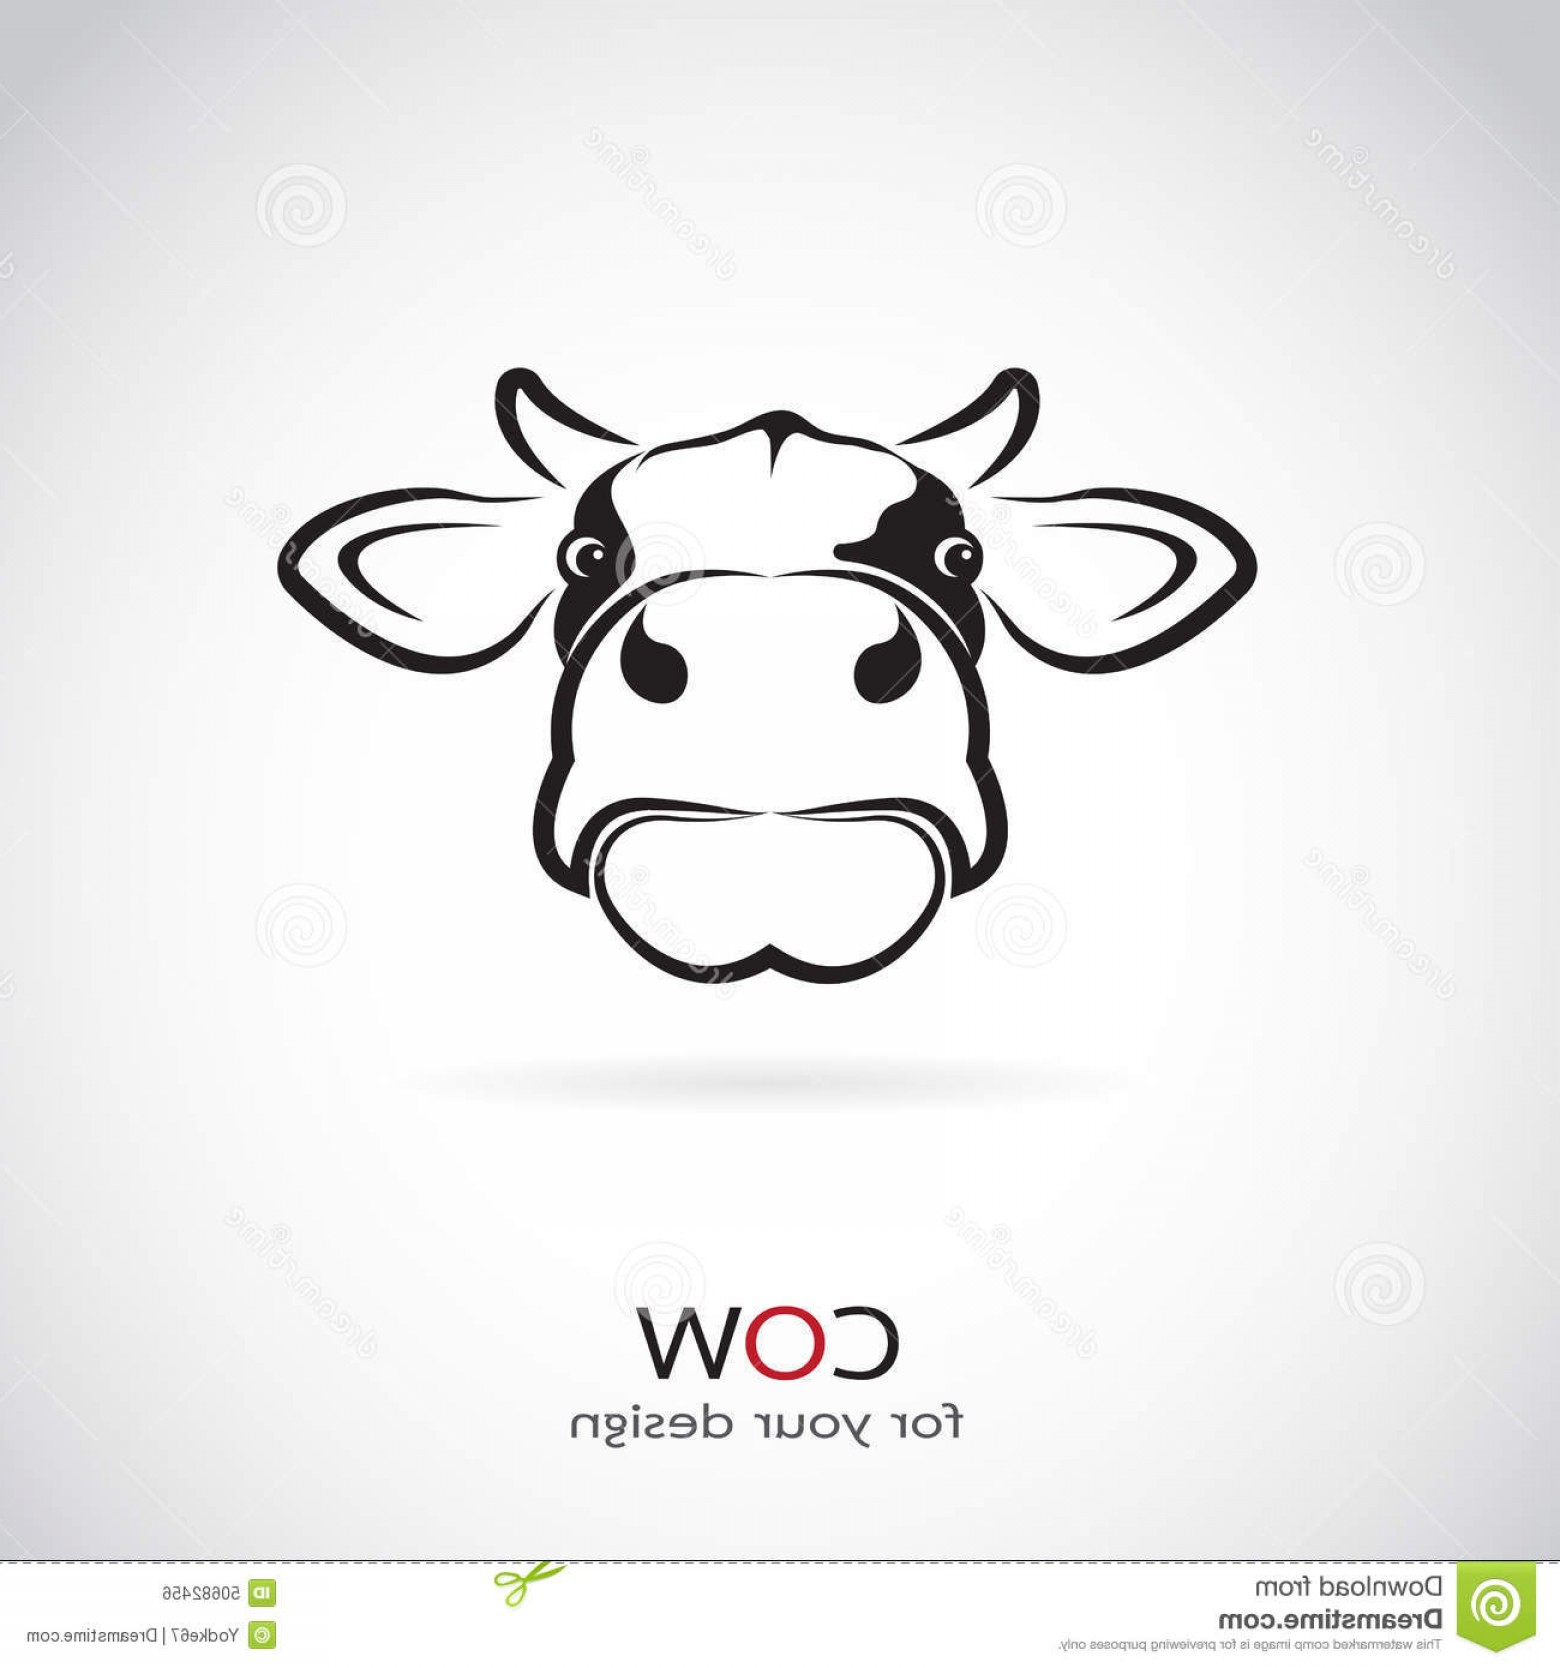 Stock Illustration Vector Image Cow Head White Background Image.